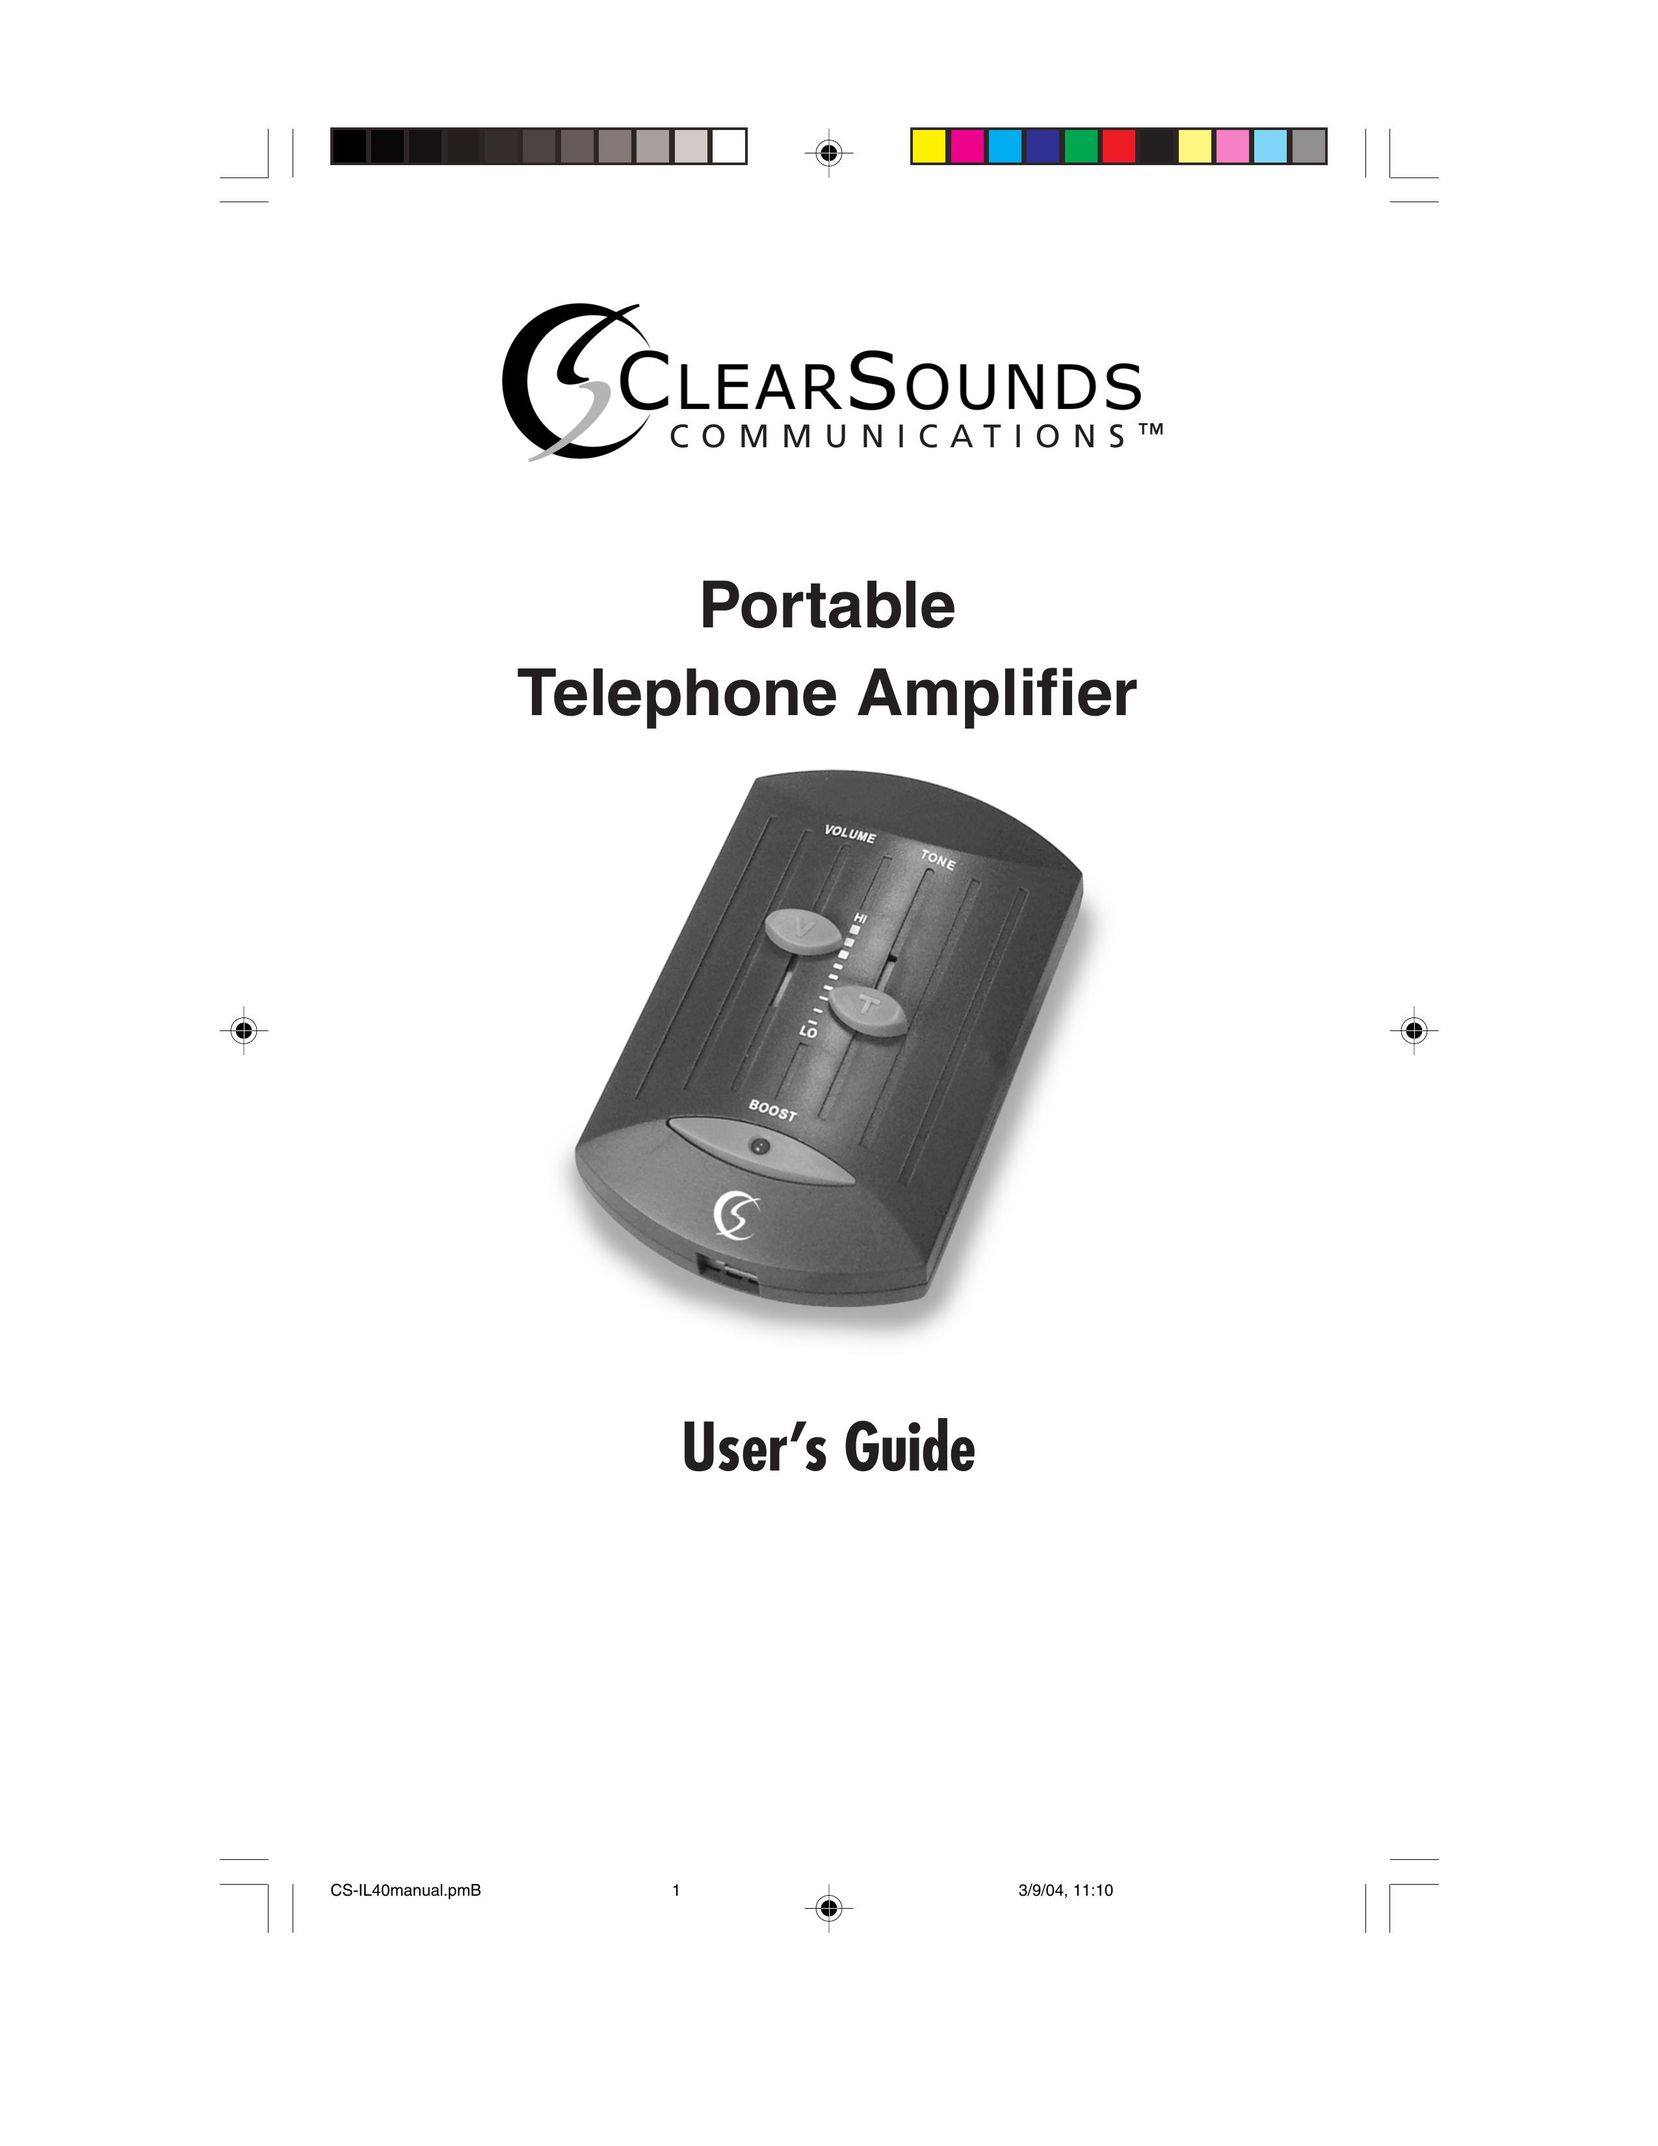 ClearSounds Portable Telephone Amplifier Stereo Amplifier User Manual